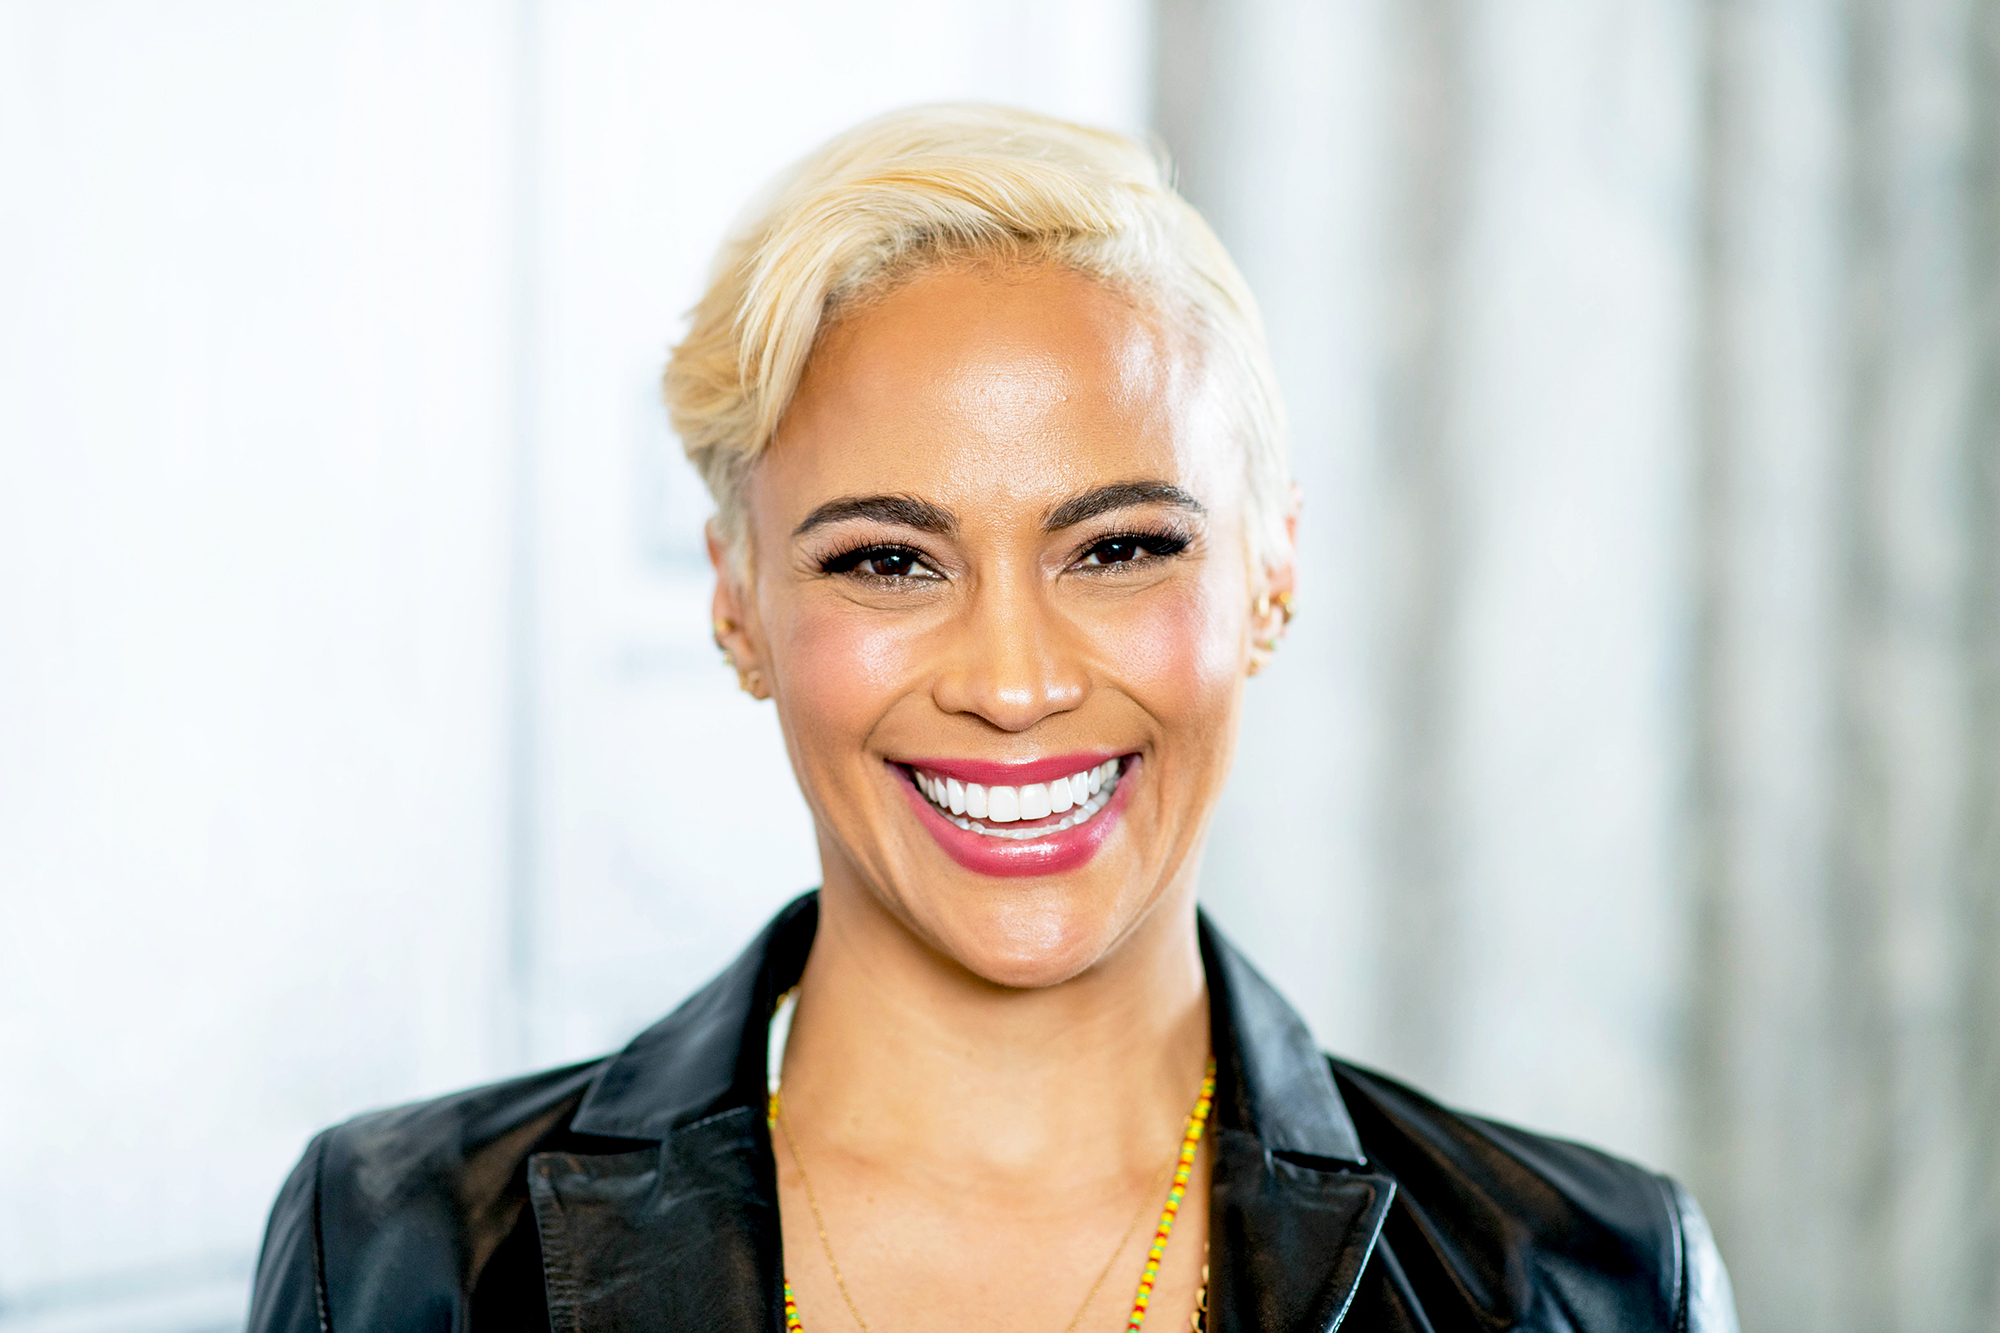 Paula Patton: 25 Things You Don't Know About Me